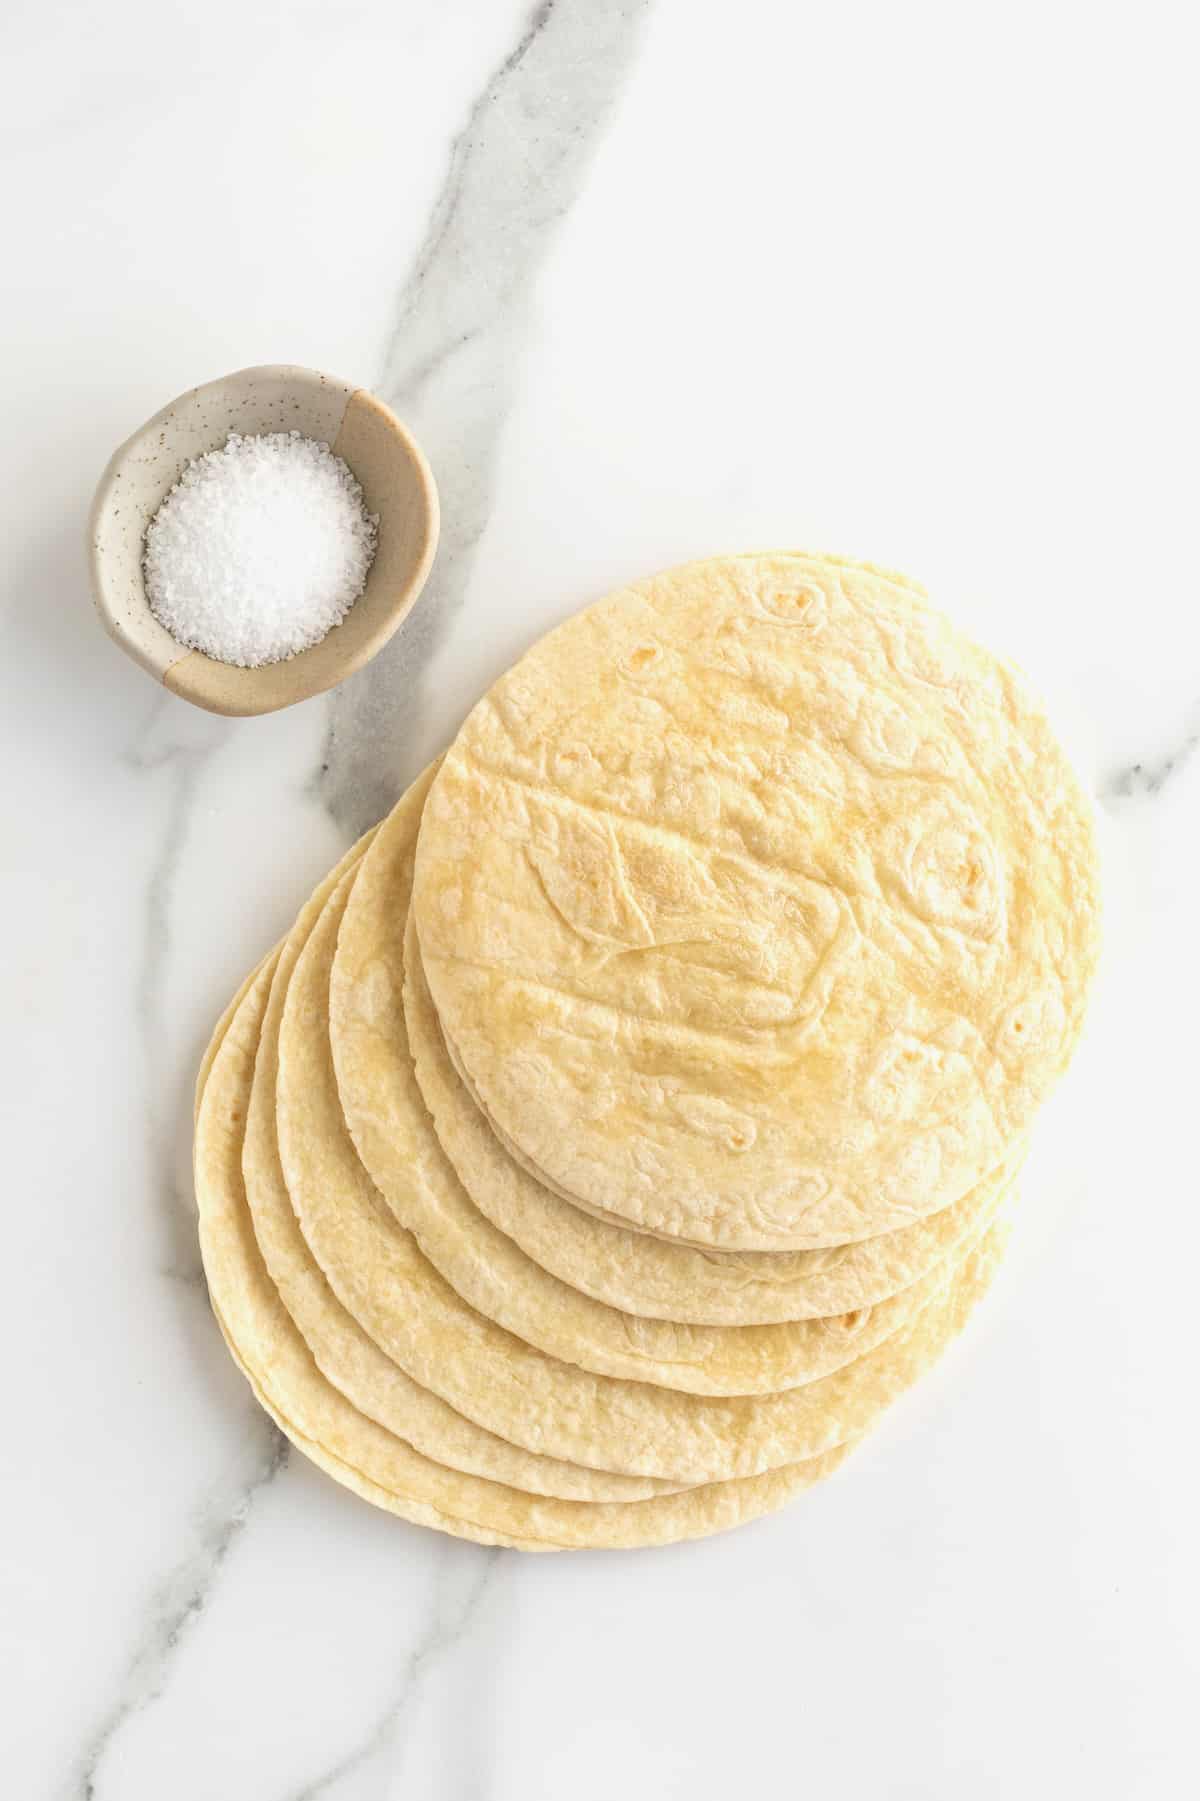 Whole flour tortillas and a  small dish of kosher salt.